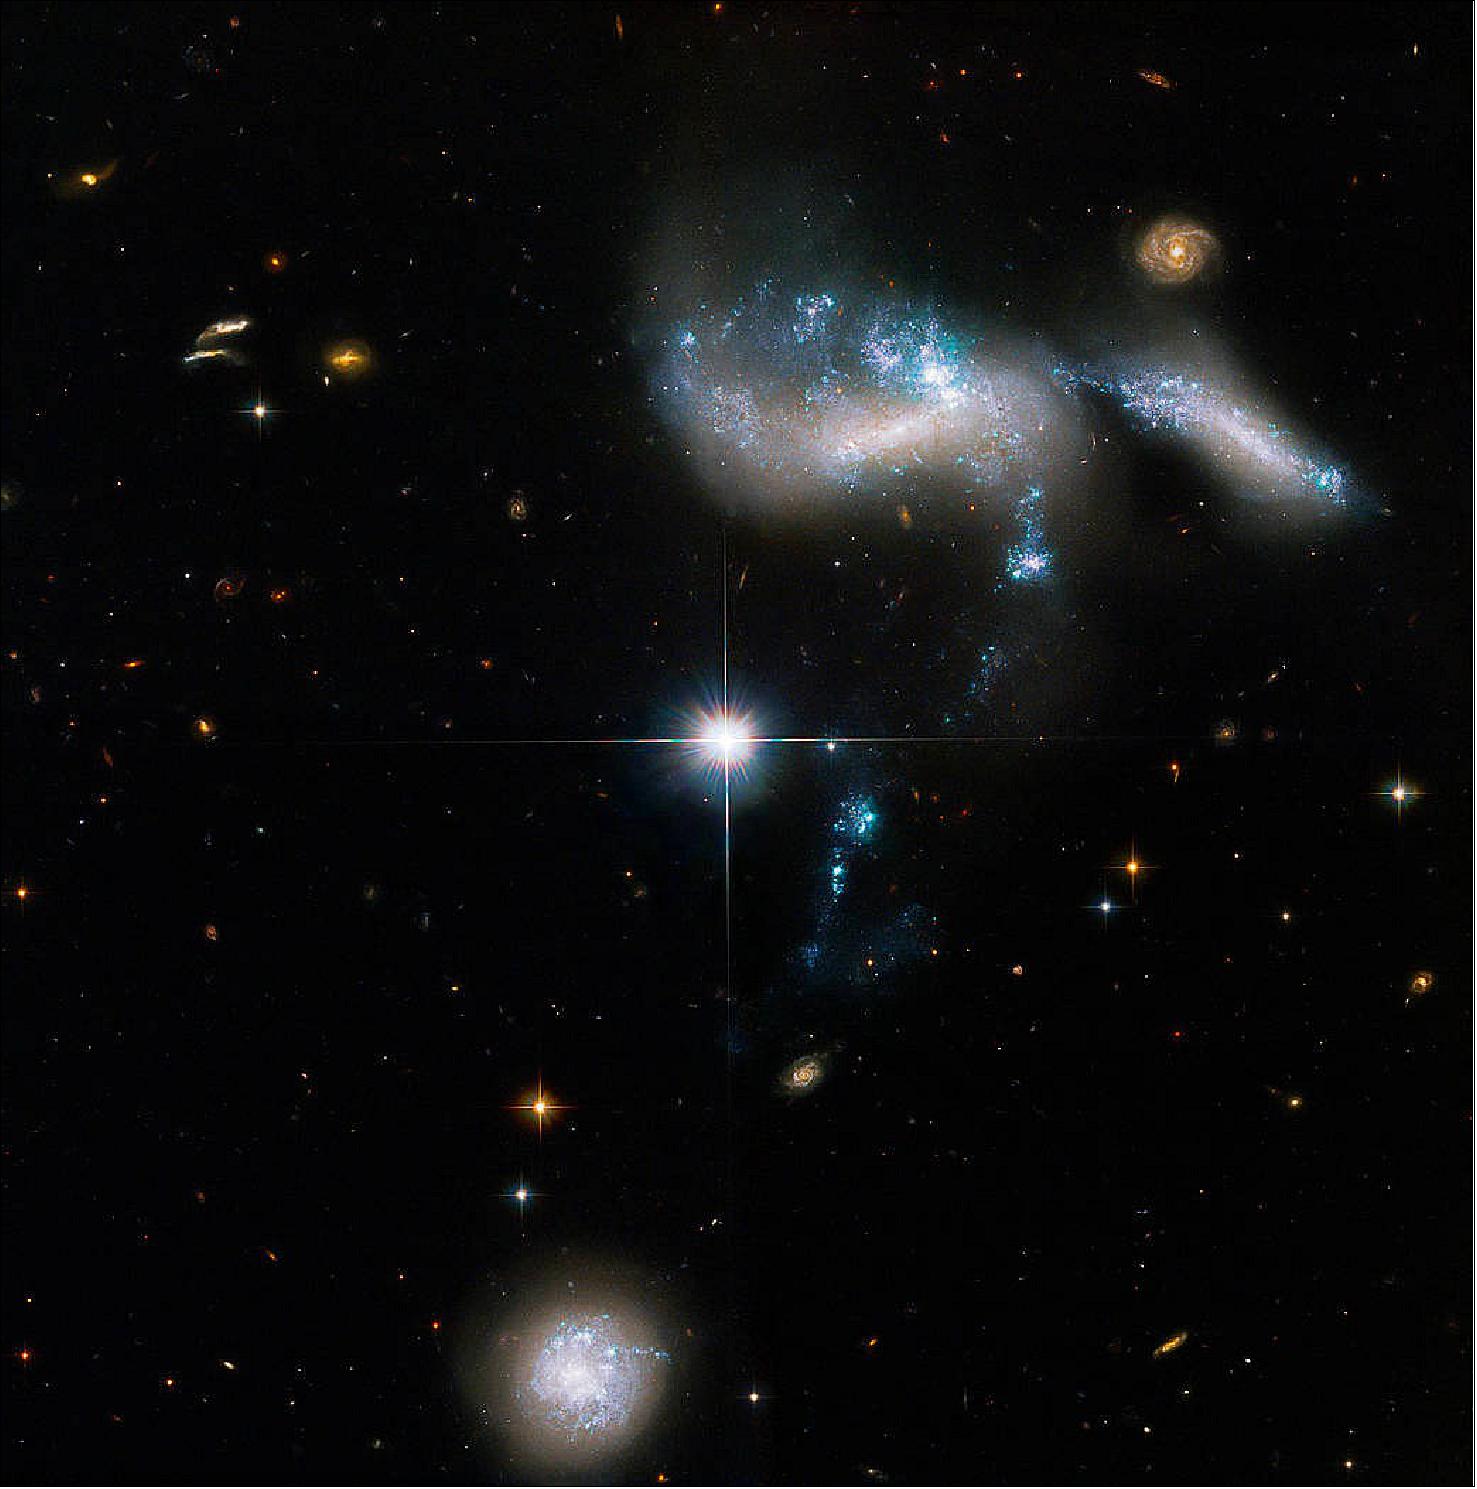 Figure 39: The bright, distorted clump of young blue-white stars (top-right of center) is NGC 1741. Although it appears to be a single galaxy, NGC 1741 is actually a pair of colliding dwarf galaxies. Another dwarf, cigar-shaped galaxy to the pair’s right joins their dance with a thin, blue stream of stars that connects the trio. HGC 31’s fourth member is revealed by a stream of young blue stars that point to the galaxy (bottom-left of center) and indicate its interaction with the other three. The bright object in the center of the image is a star situated between Earth and HCG 31 [image credit: NASA, ESA, and J. Charlton (Pennsylvania State University); Image processing: G. Kober (NASA Goddard/Catholic University of America)]